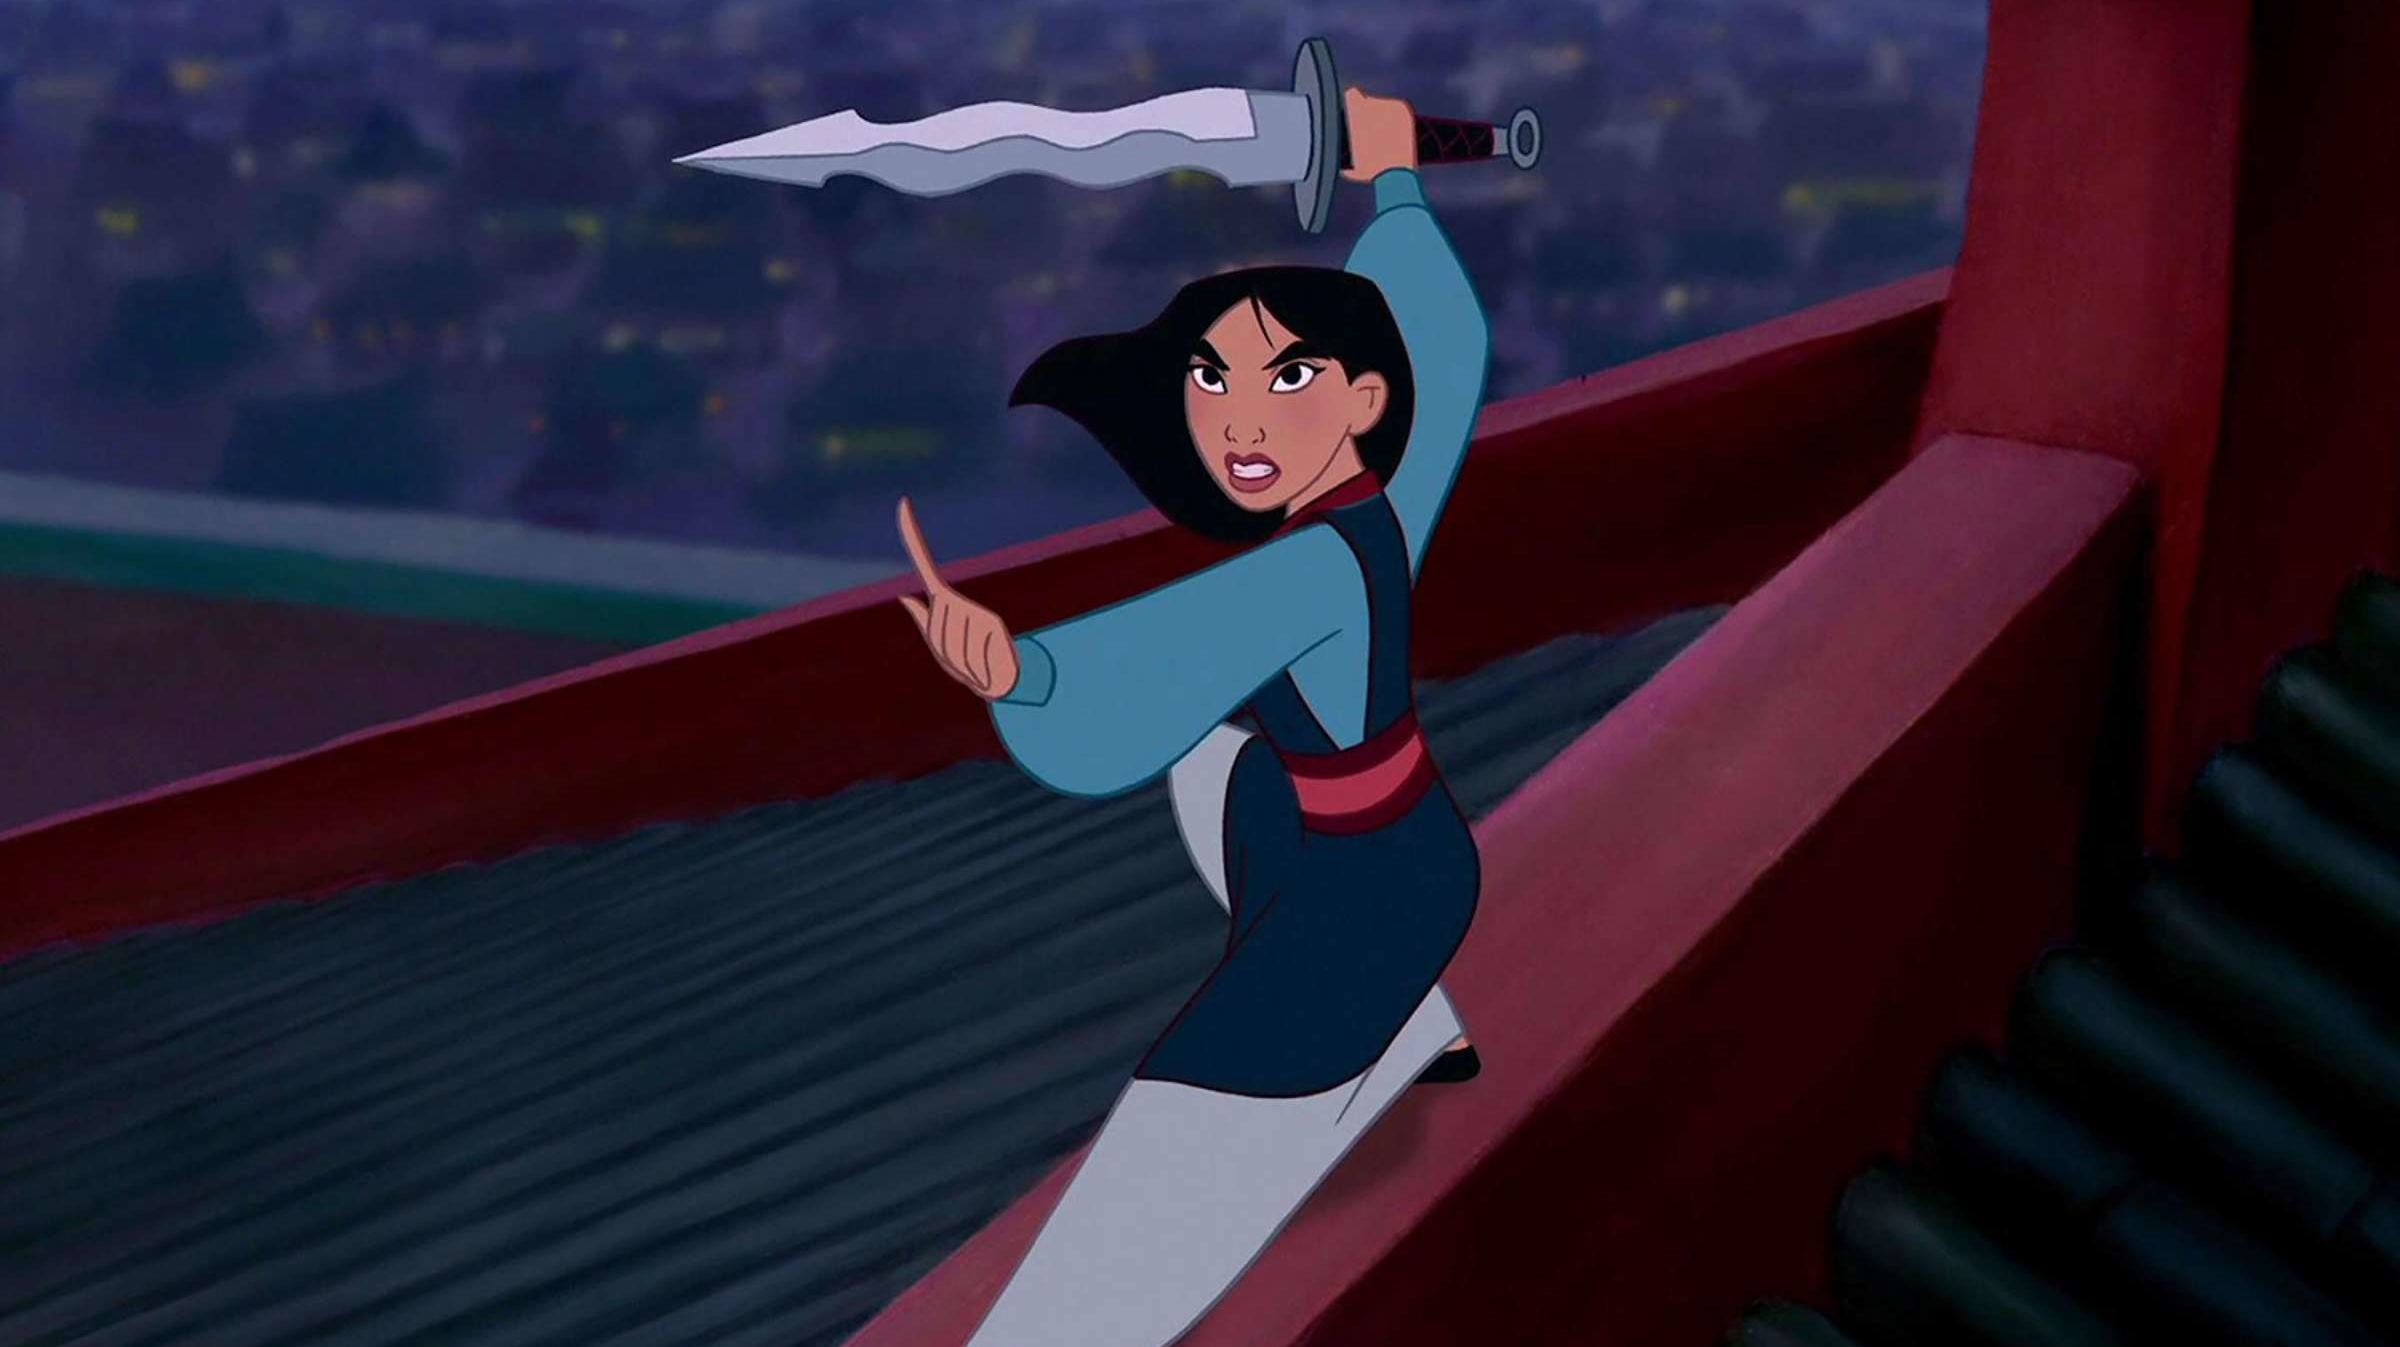 Mulan with a sword on the roof.